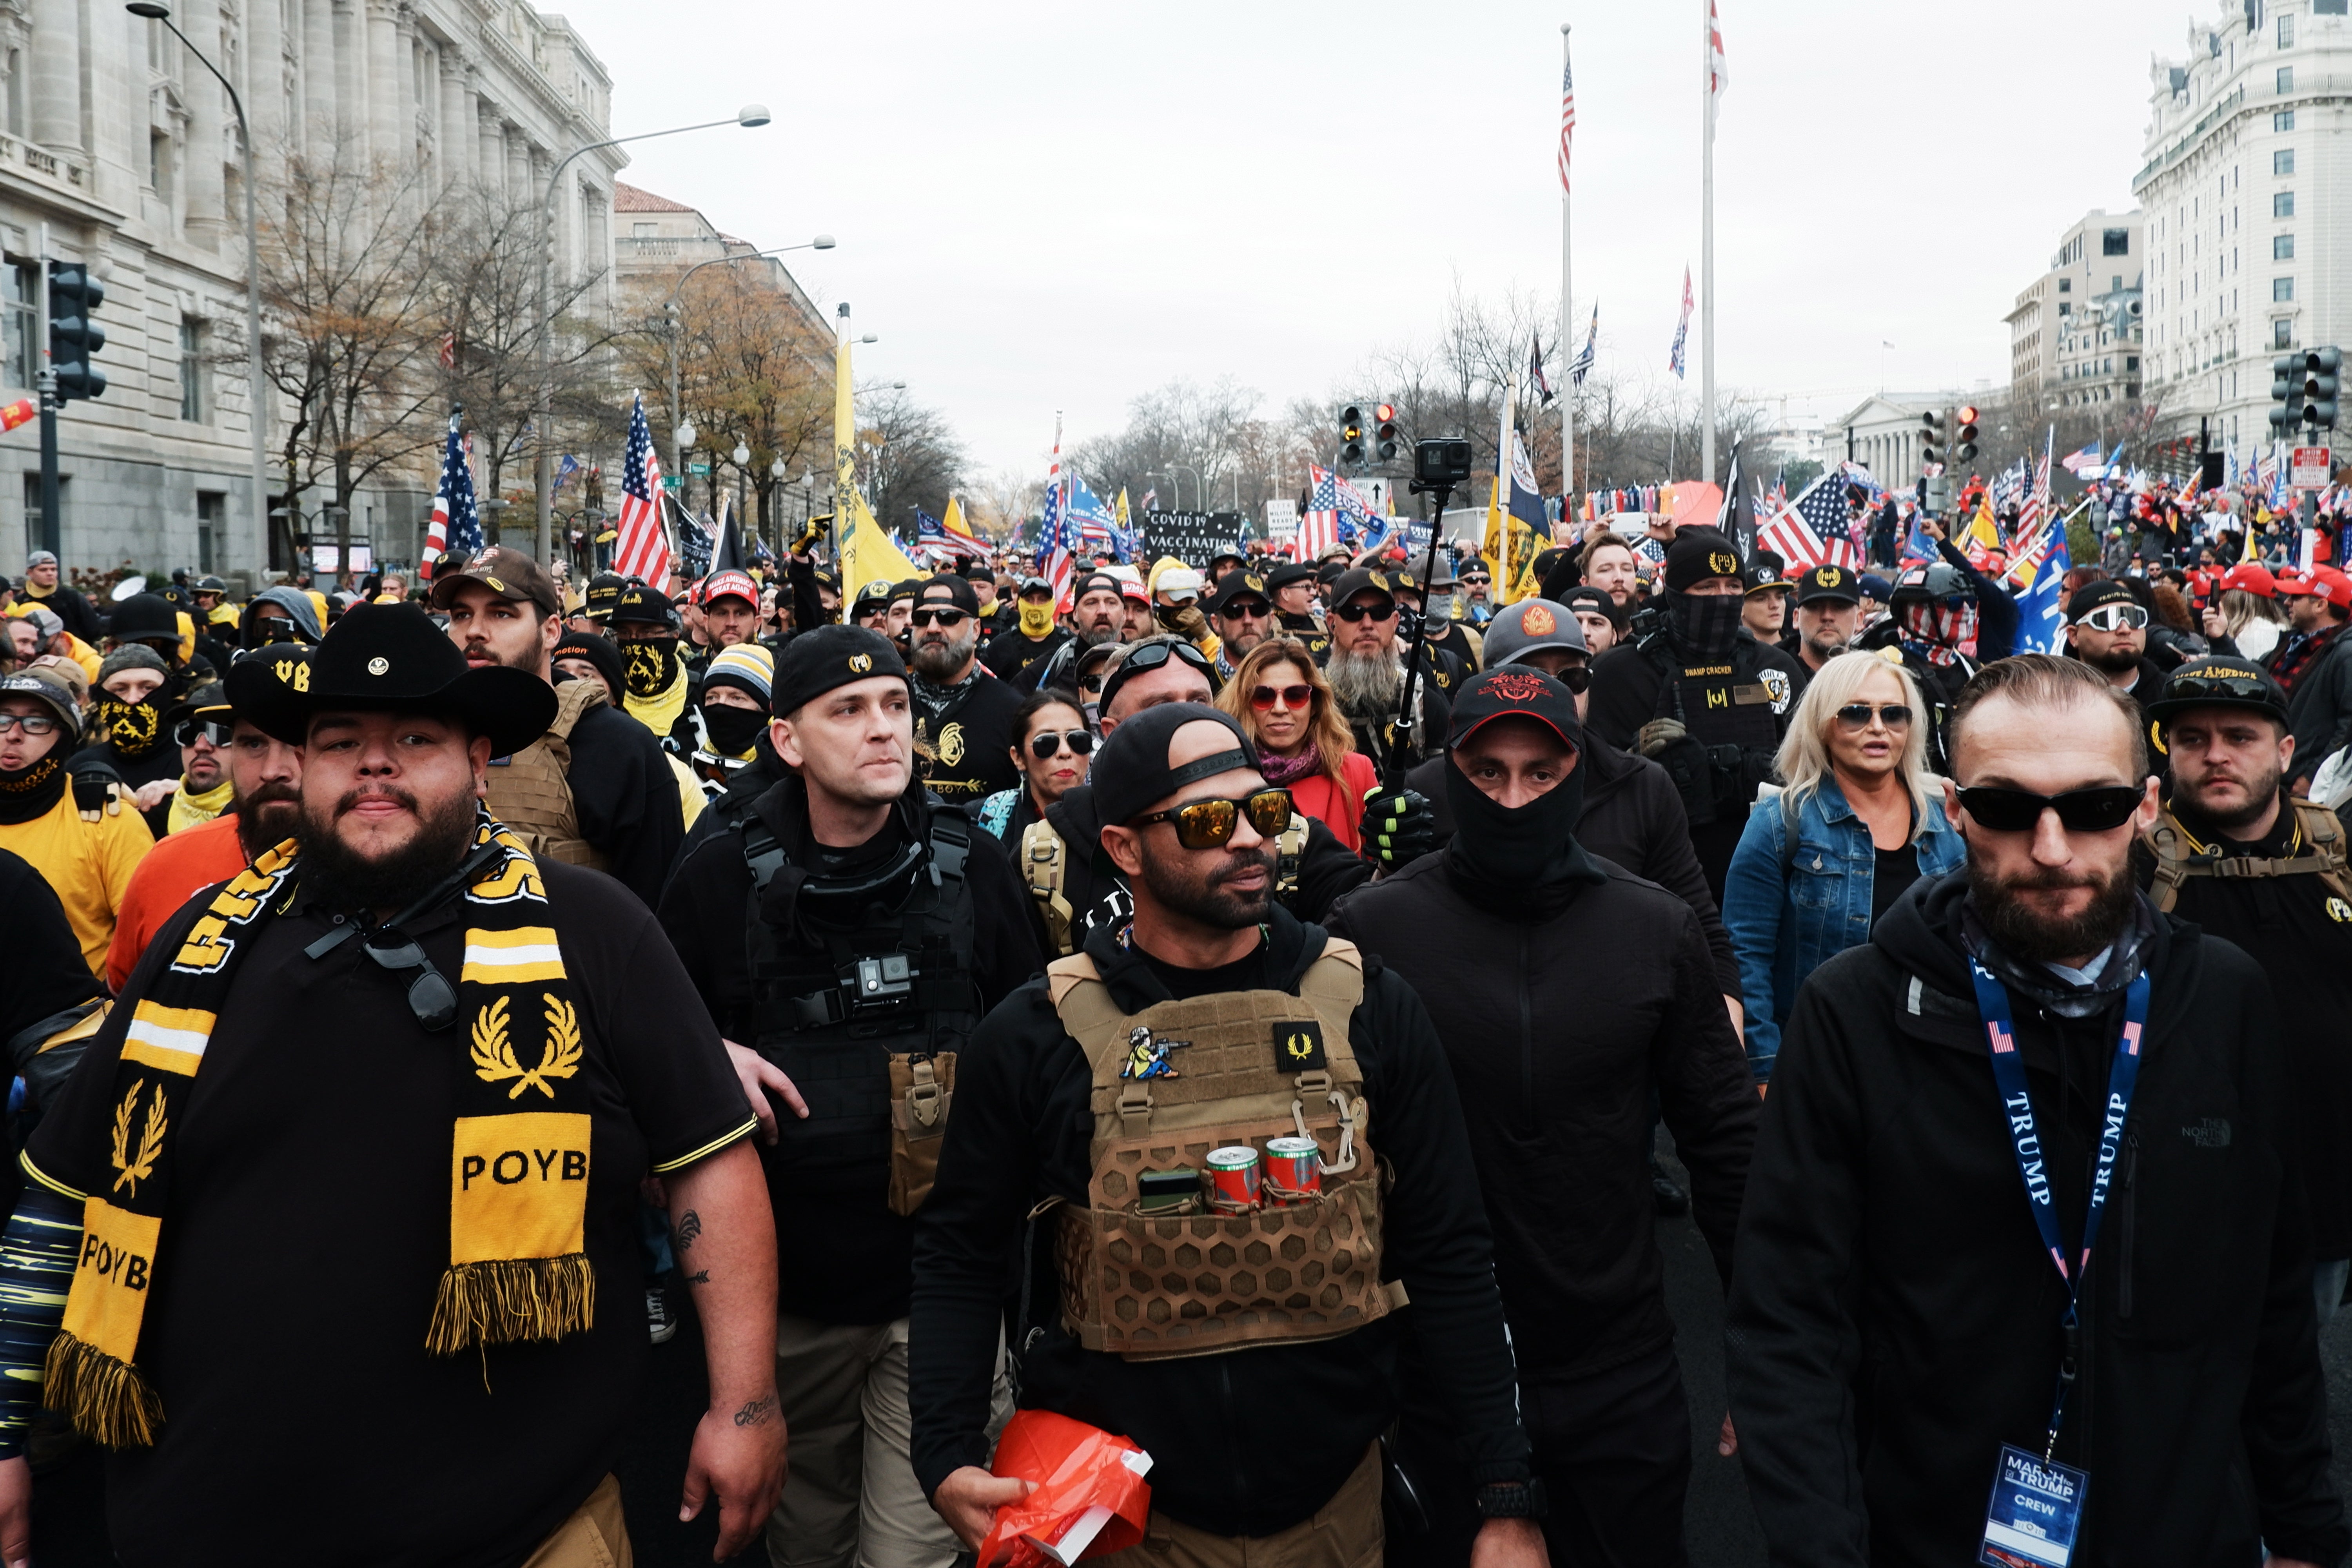 Enrique Tarrio, centre, and members of the far-right Proud Boys led demonstrations in Washington DC on 12 December.